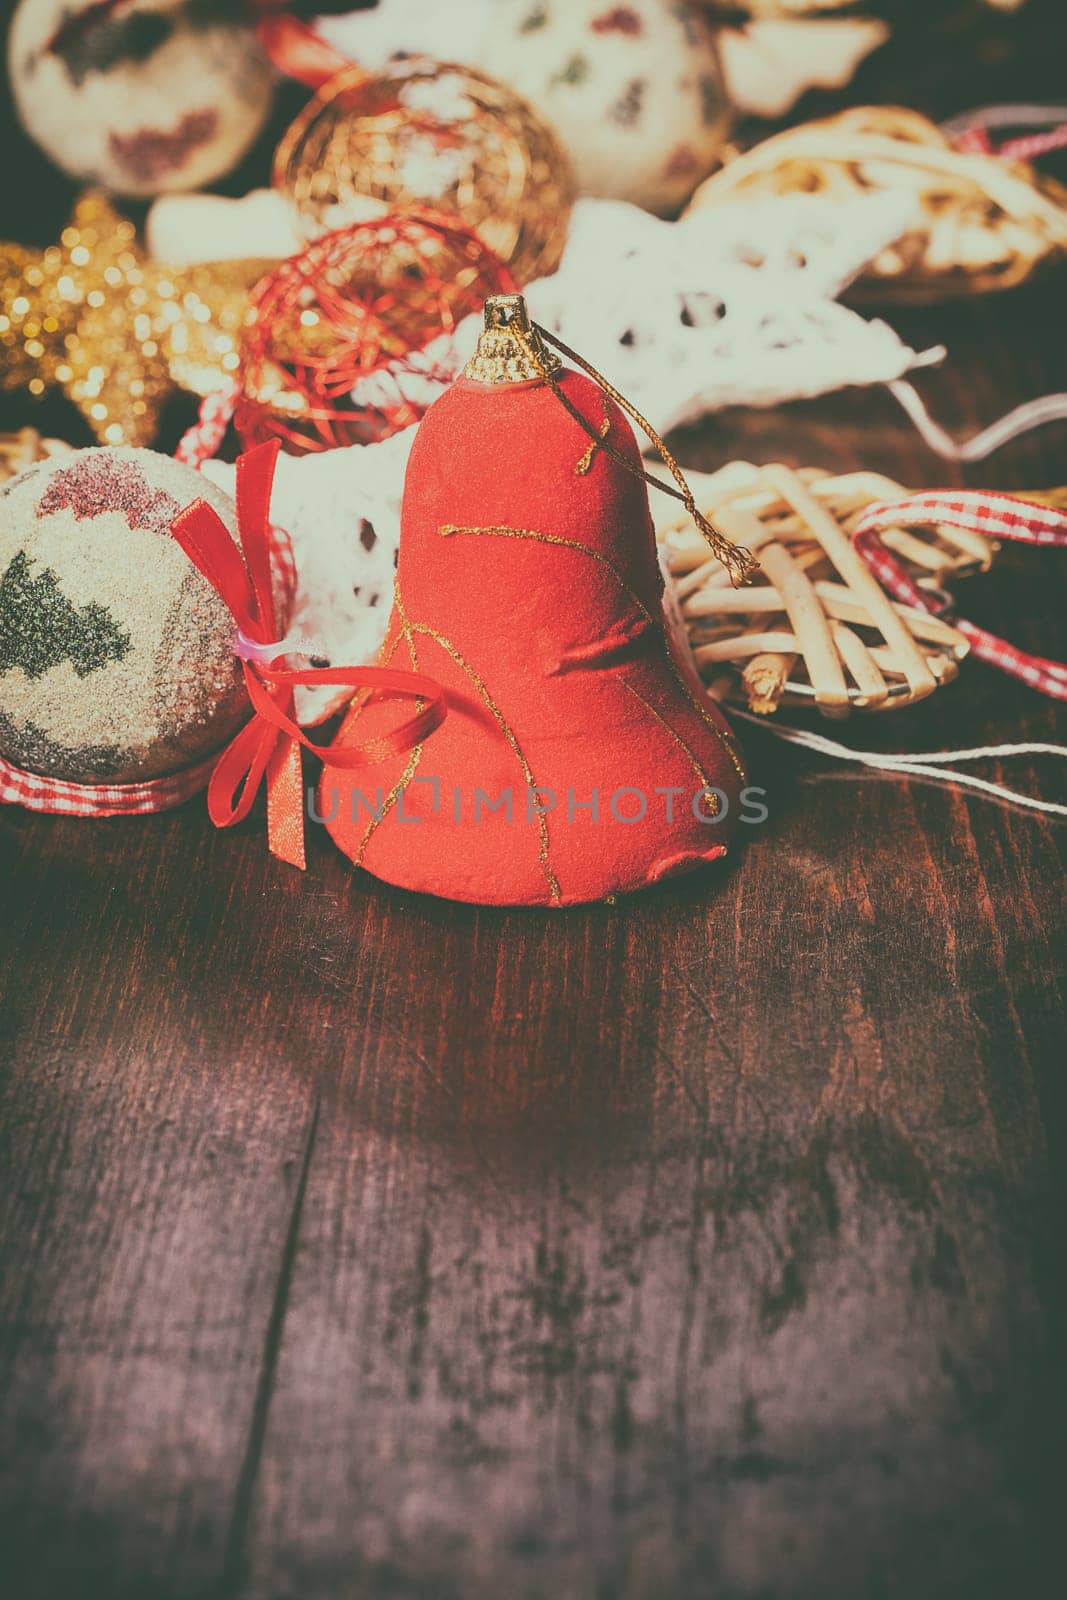 Decoration in vintage toning on wooden background. Xmas ornaments